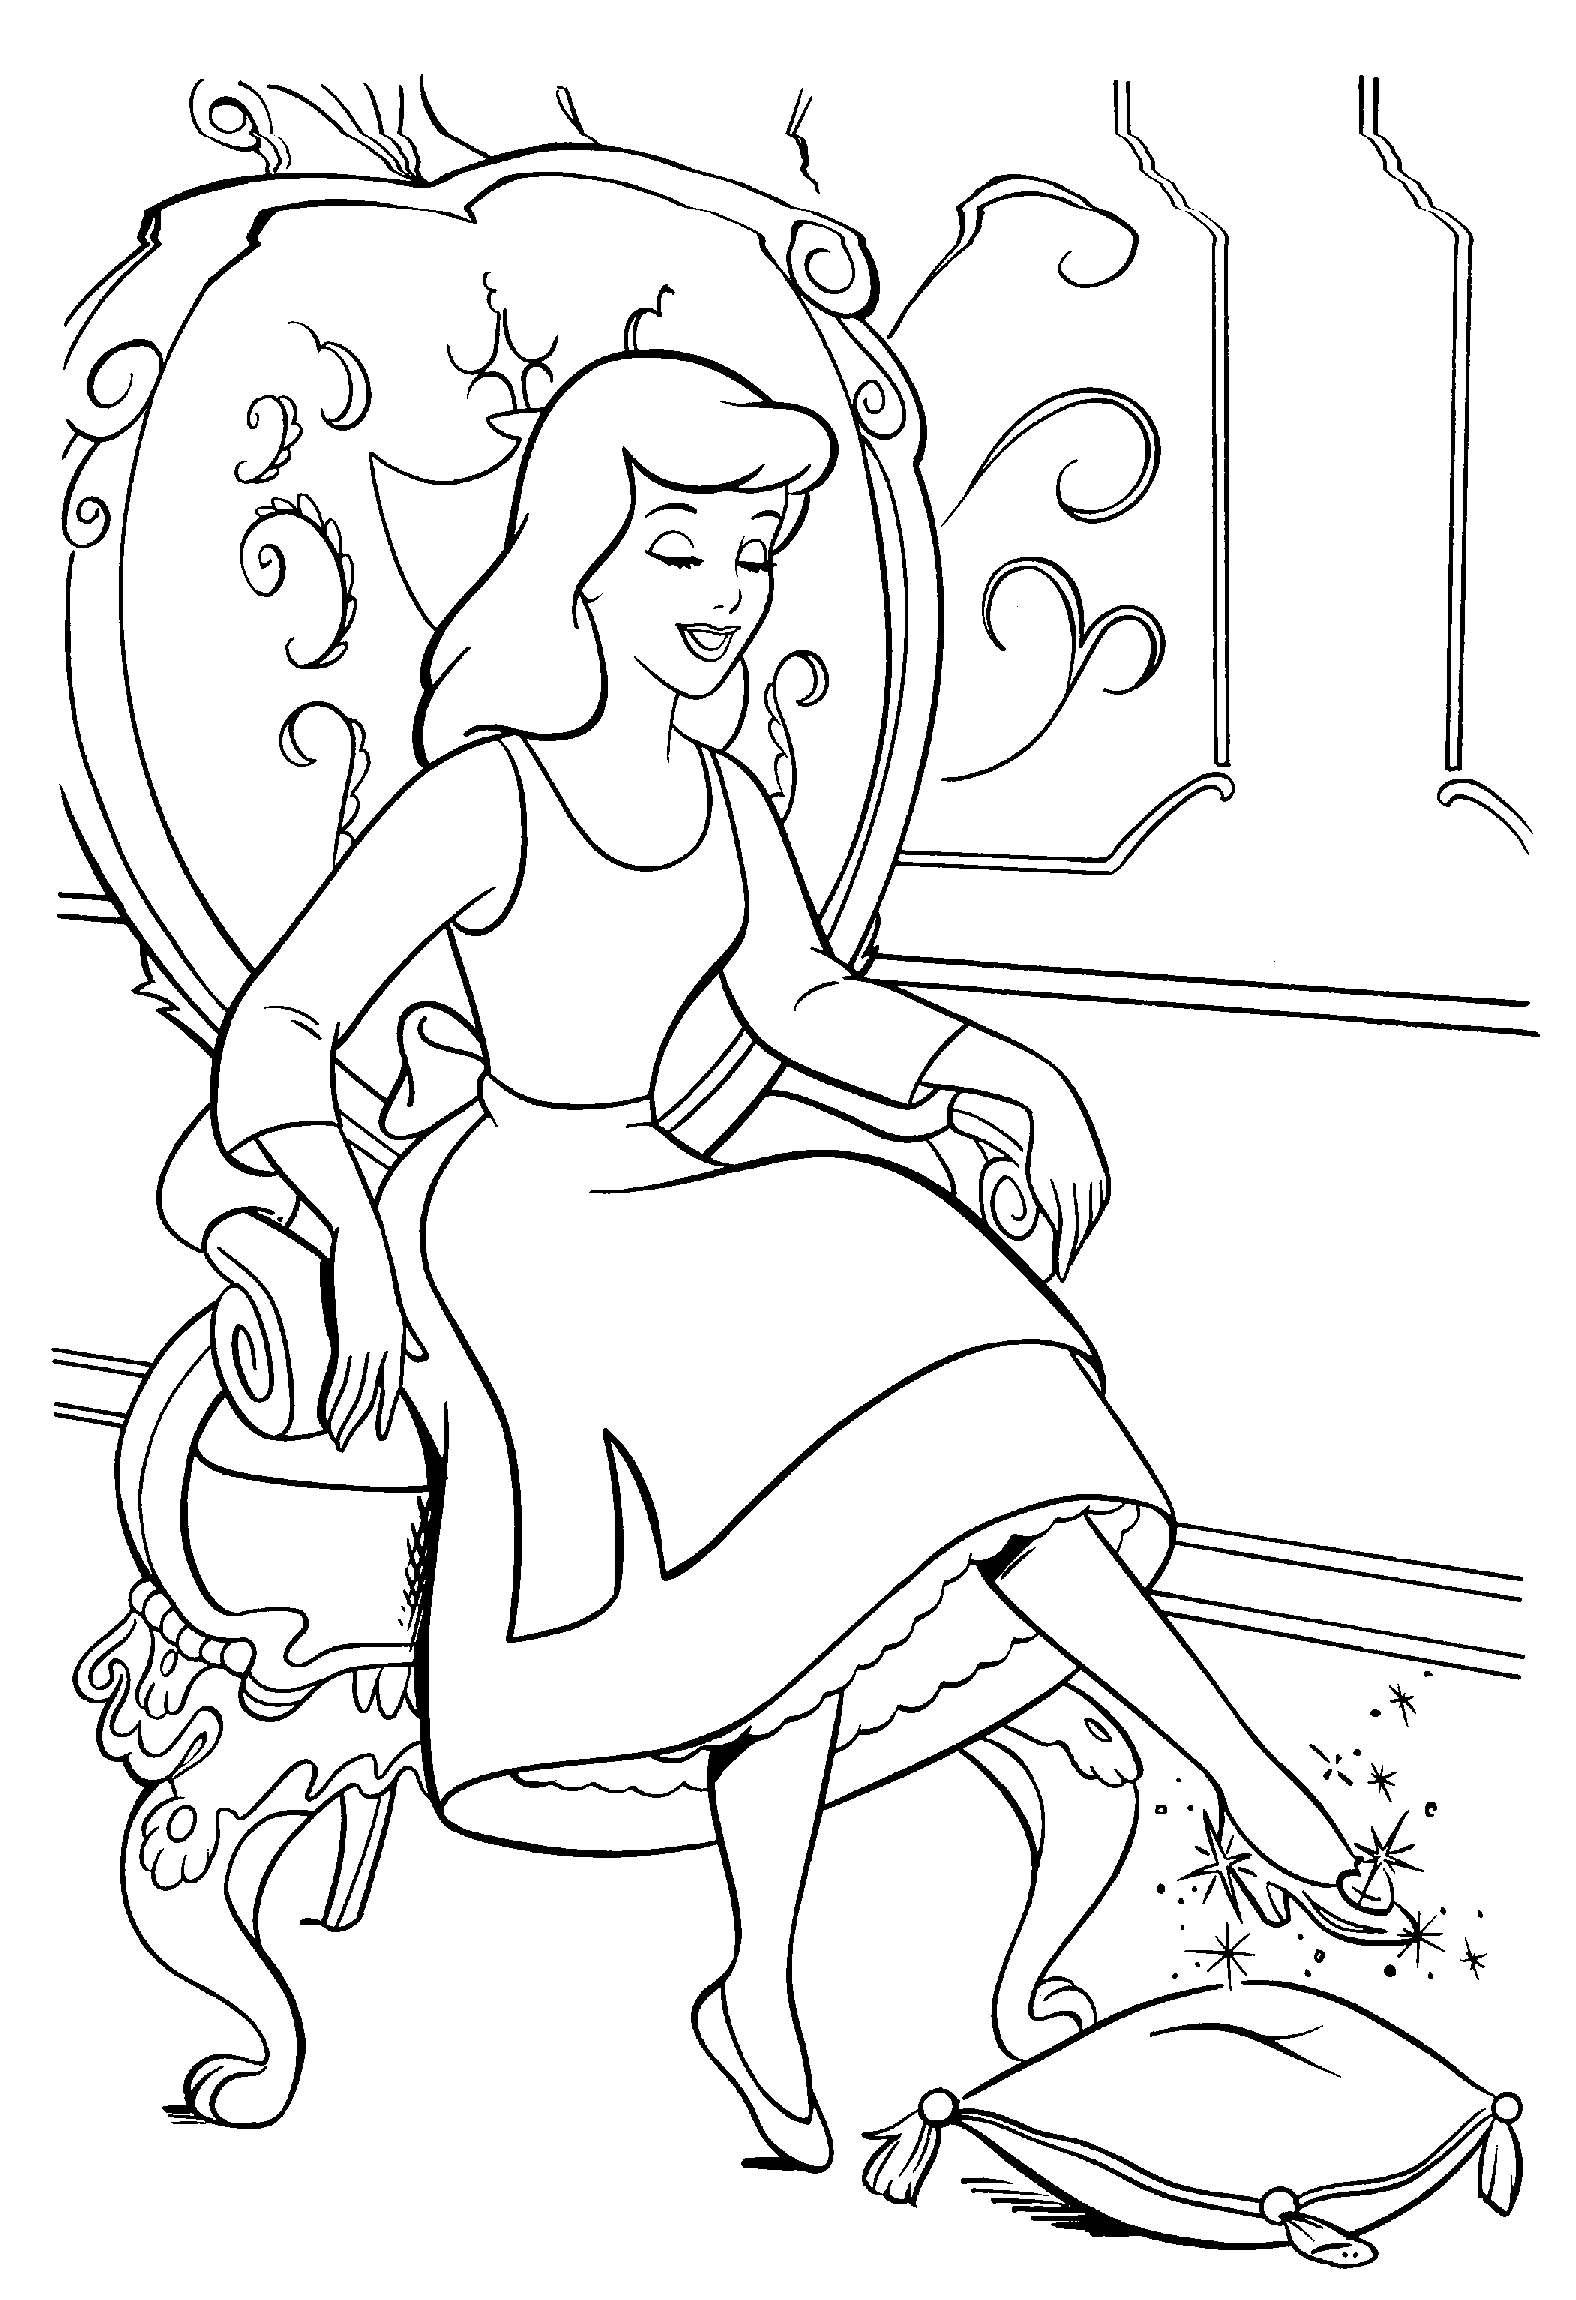 Cinderella Coloring Pages Animals - Coloring Pages For All Ages